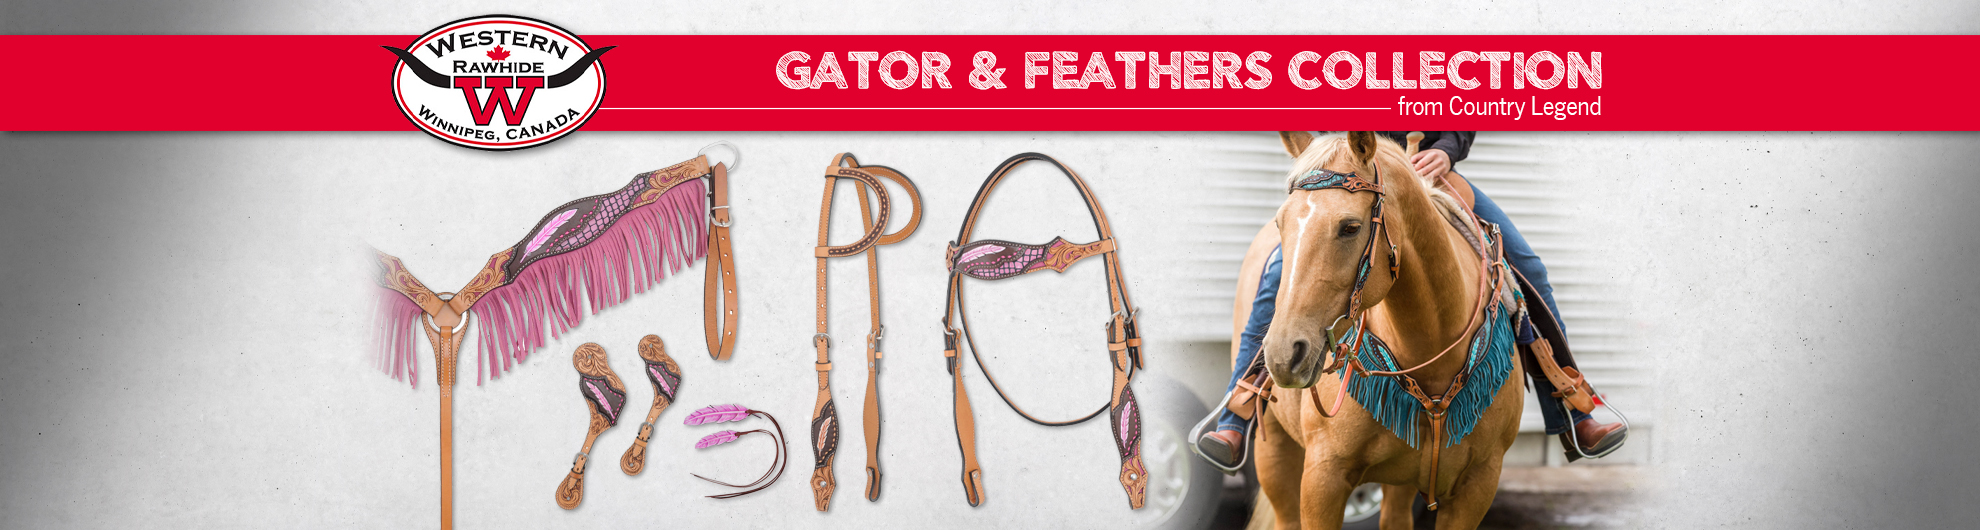 Gator & Feathers Collection from Country Legend